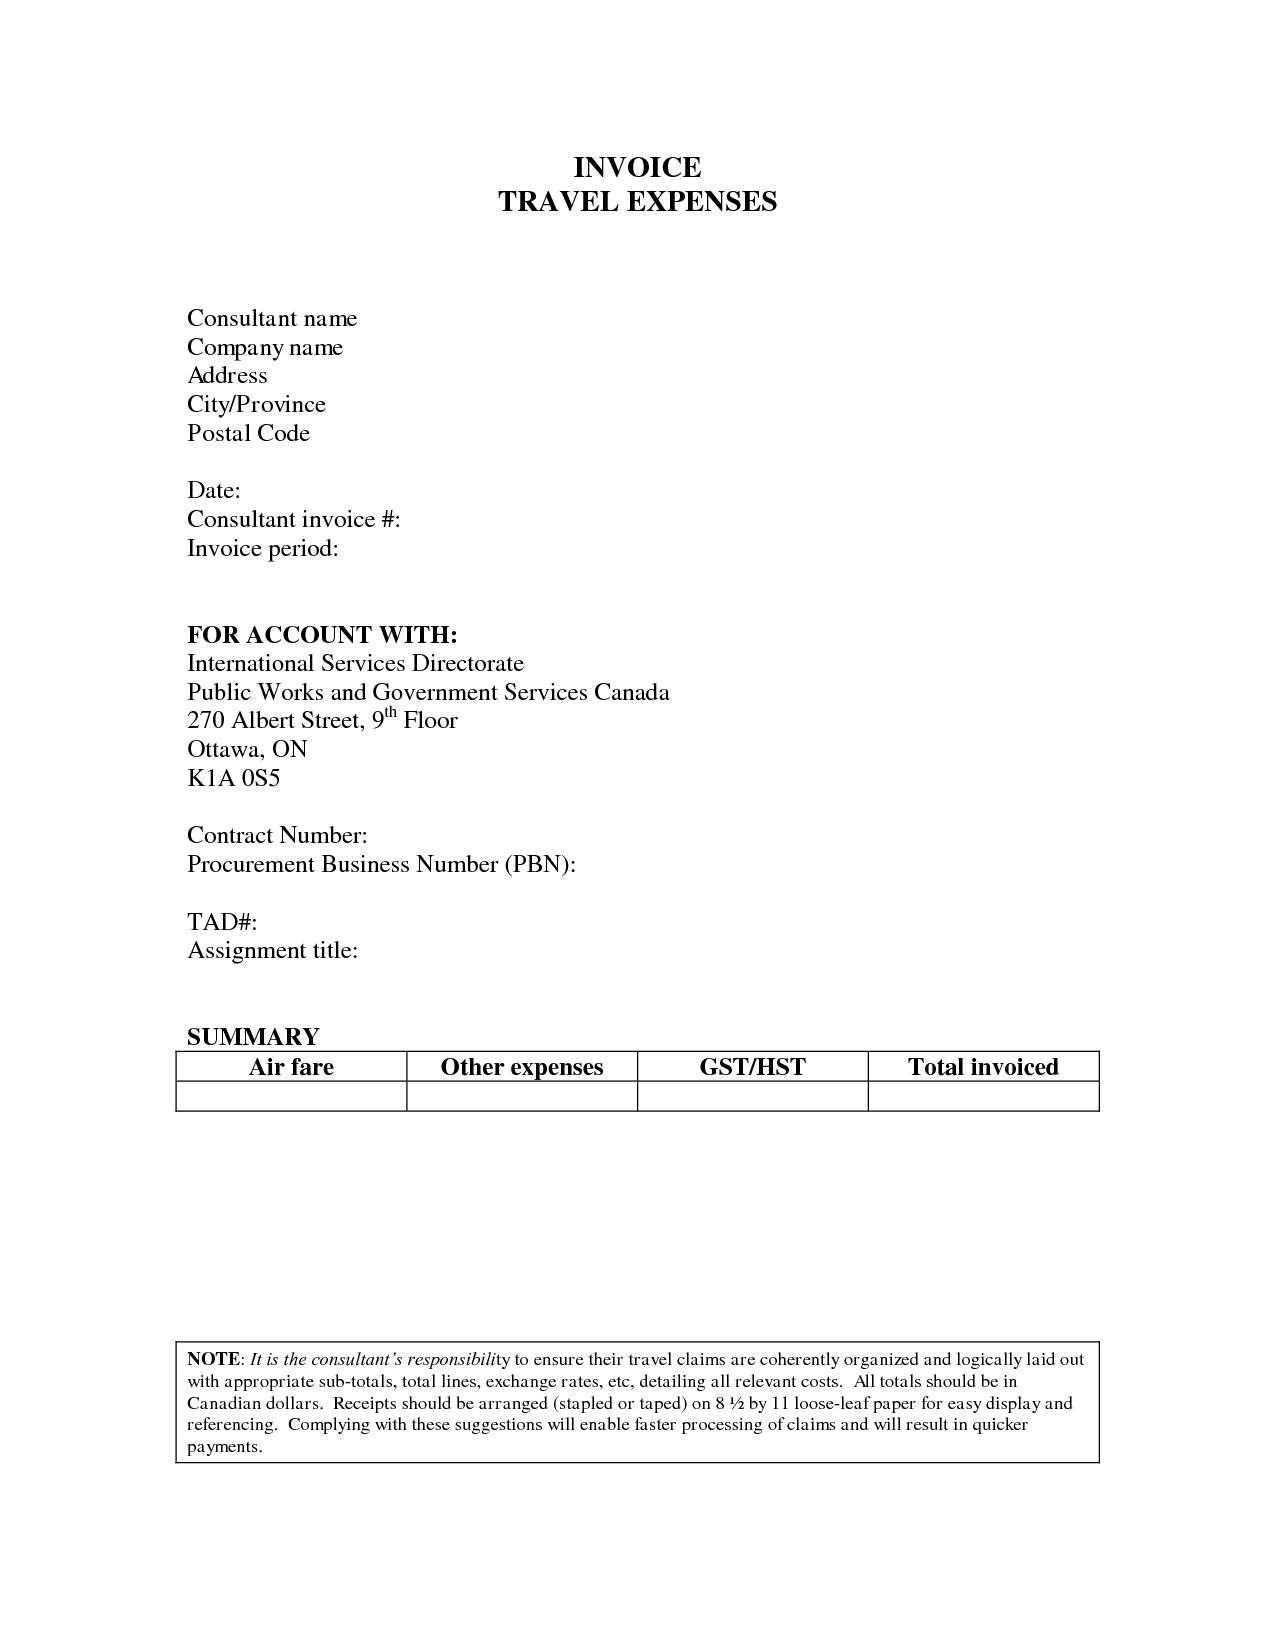 expenses invoice template invoice template free 2016 invoice for expenses